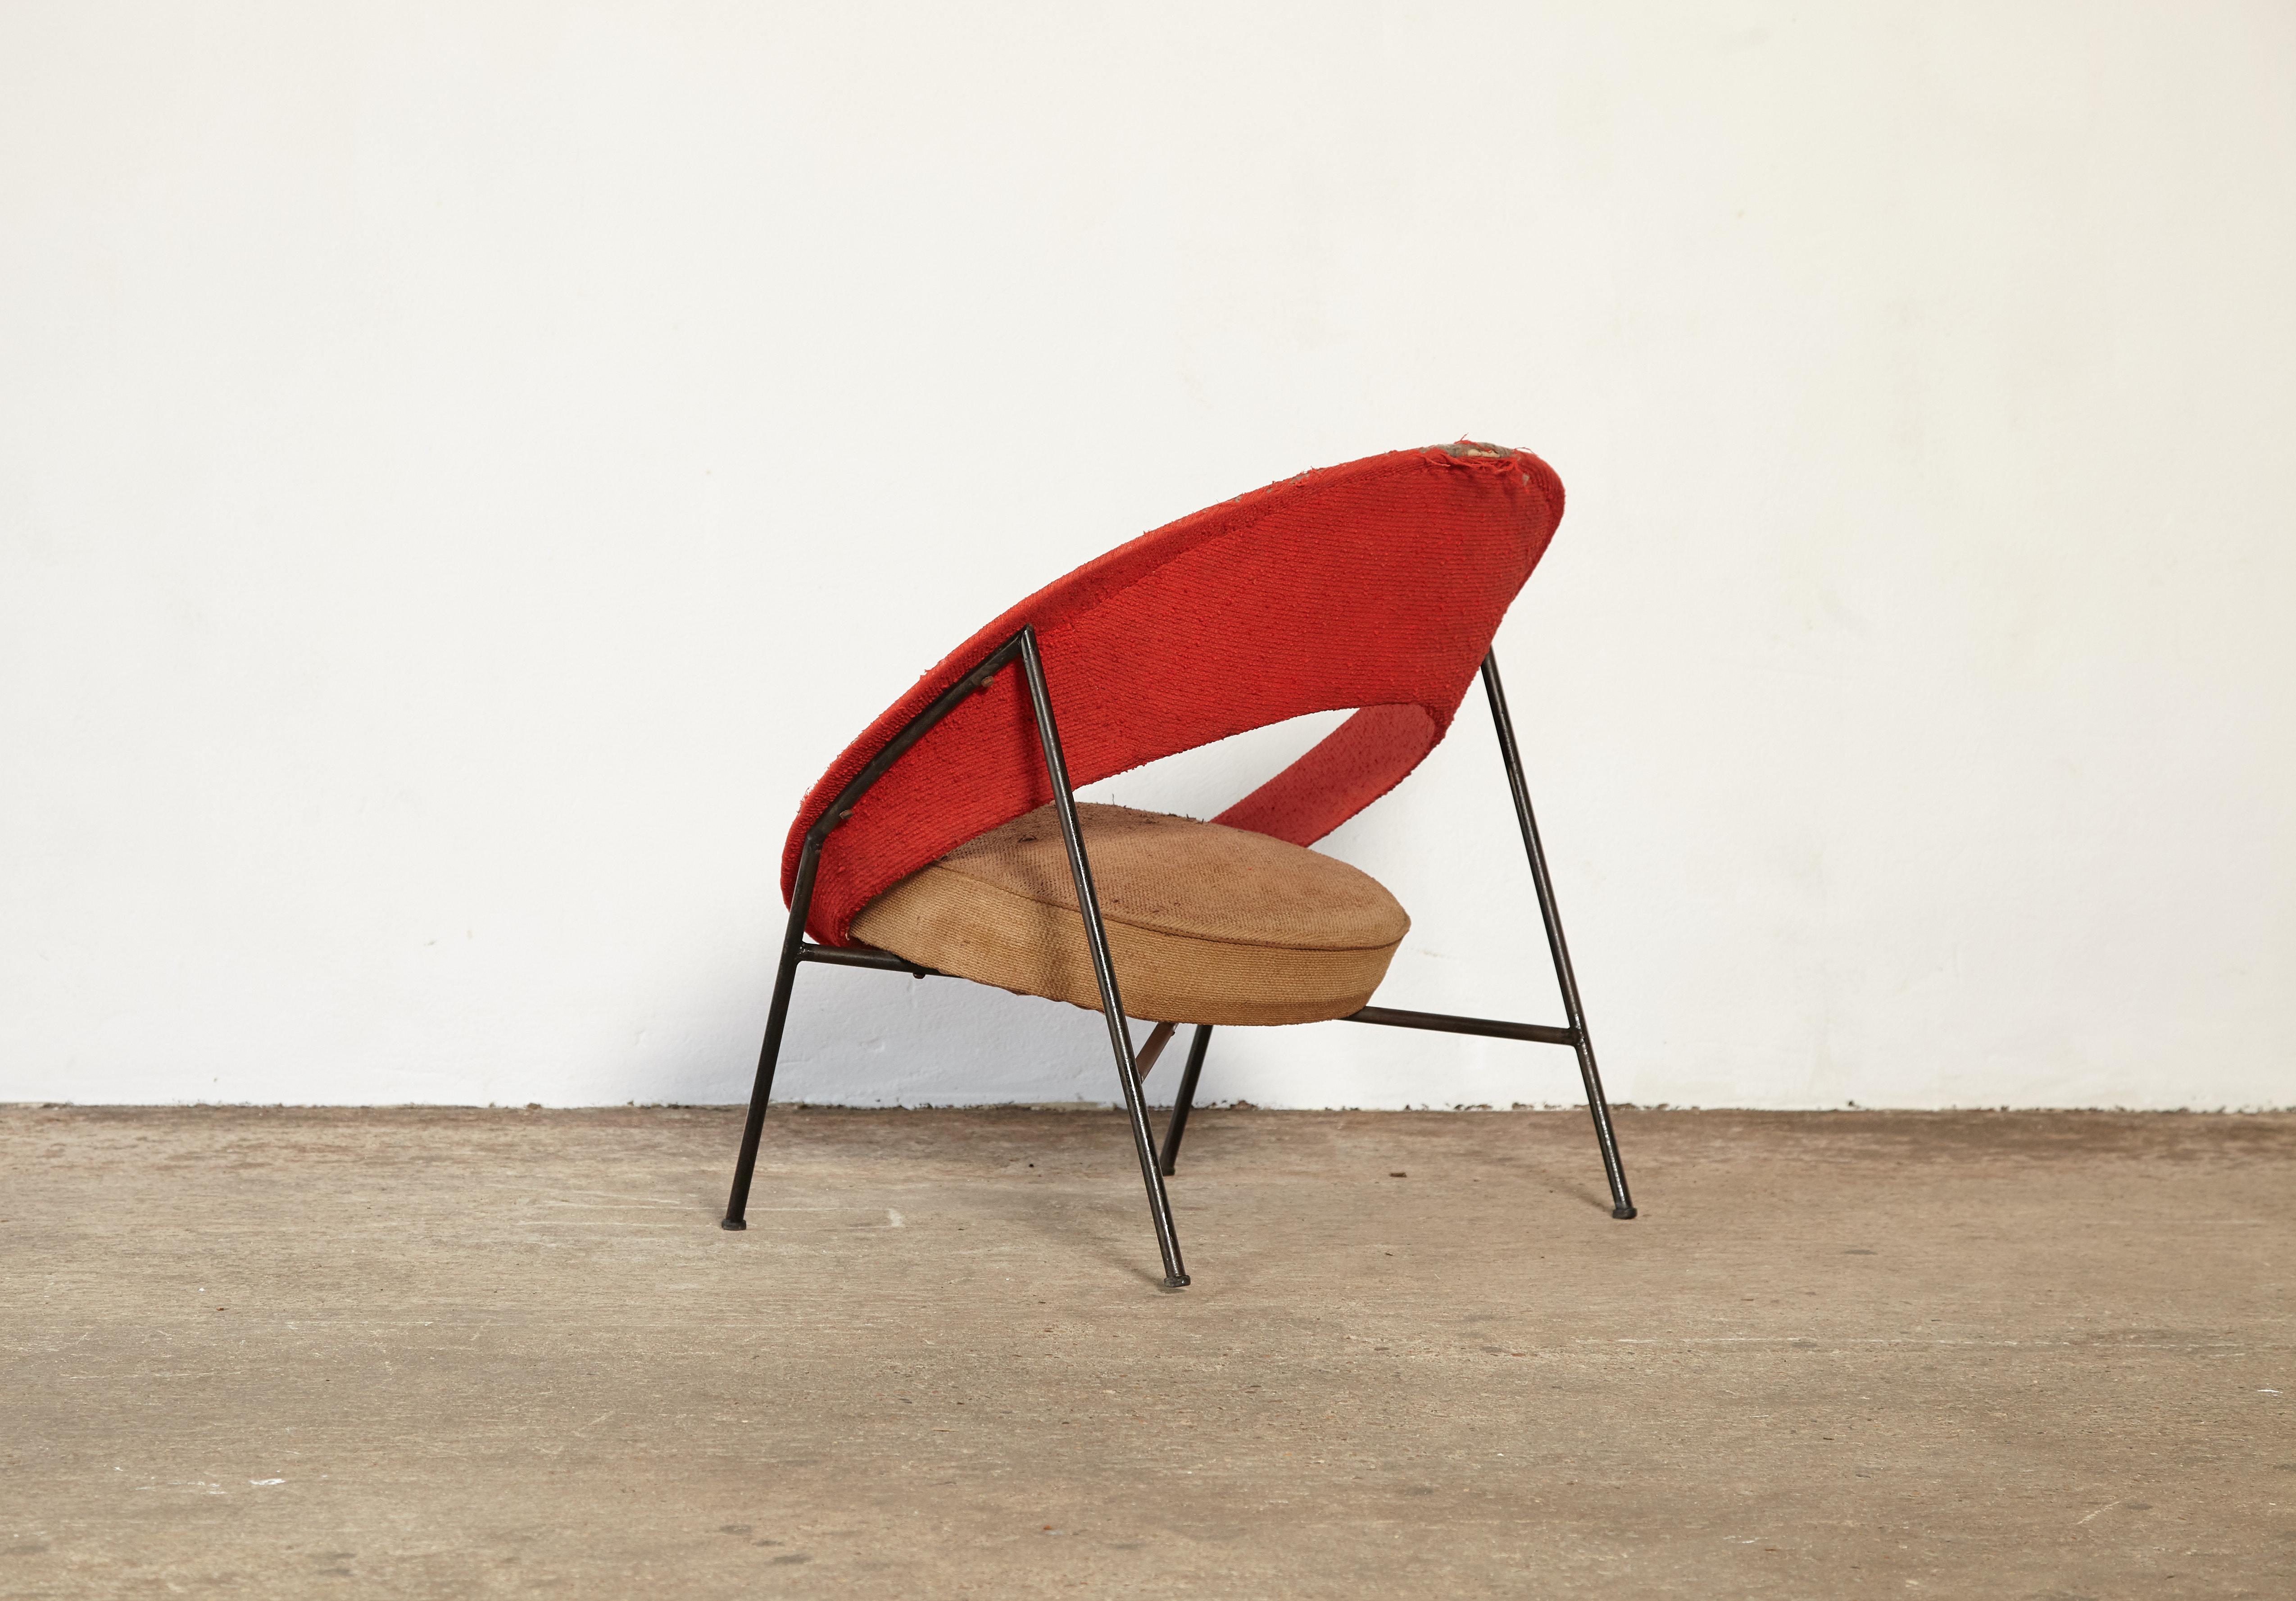 Mid-20th Century Rare Saturne Armchair by Genevieve Dangles and Christian Defrance, France, 1950s